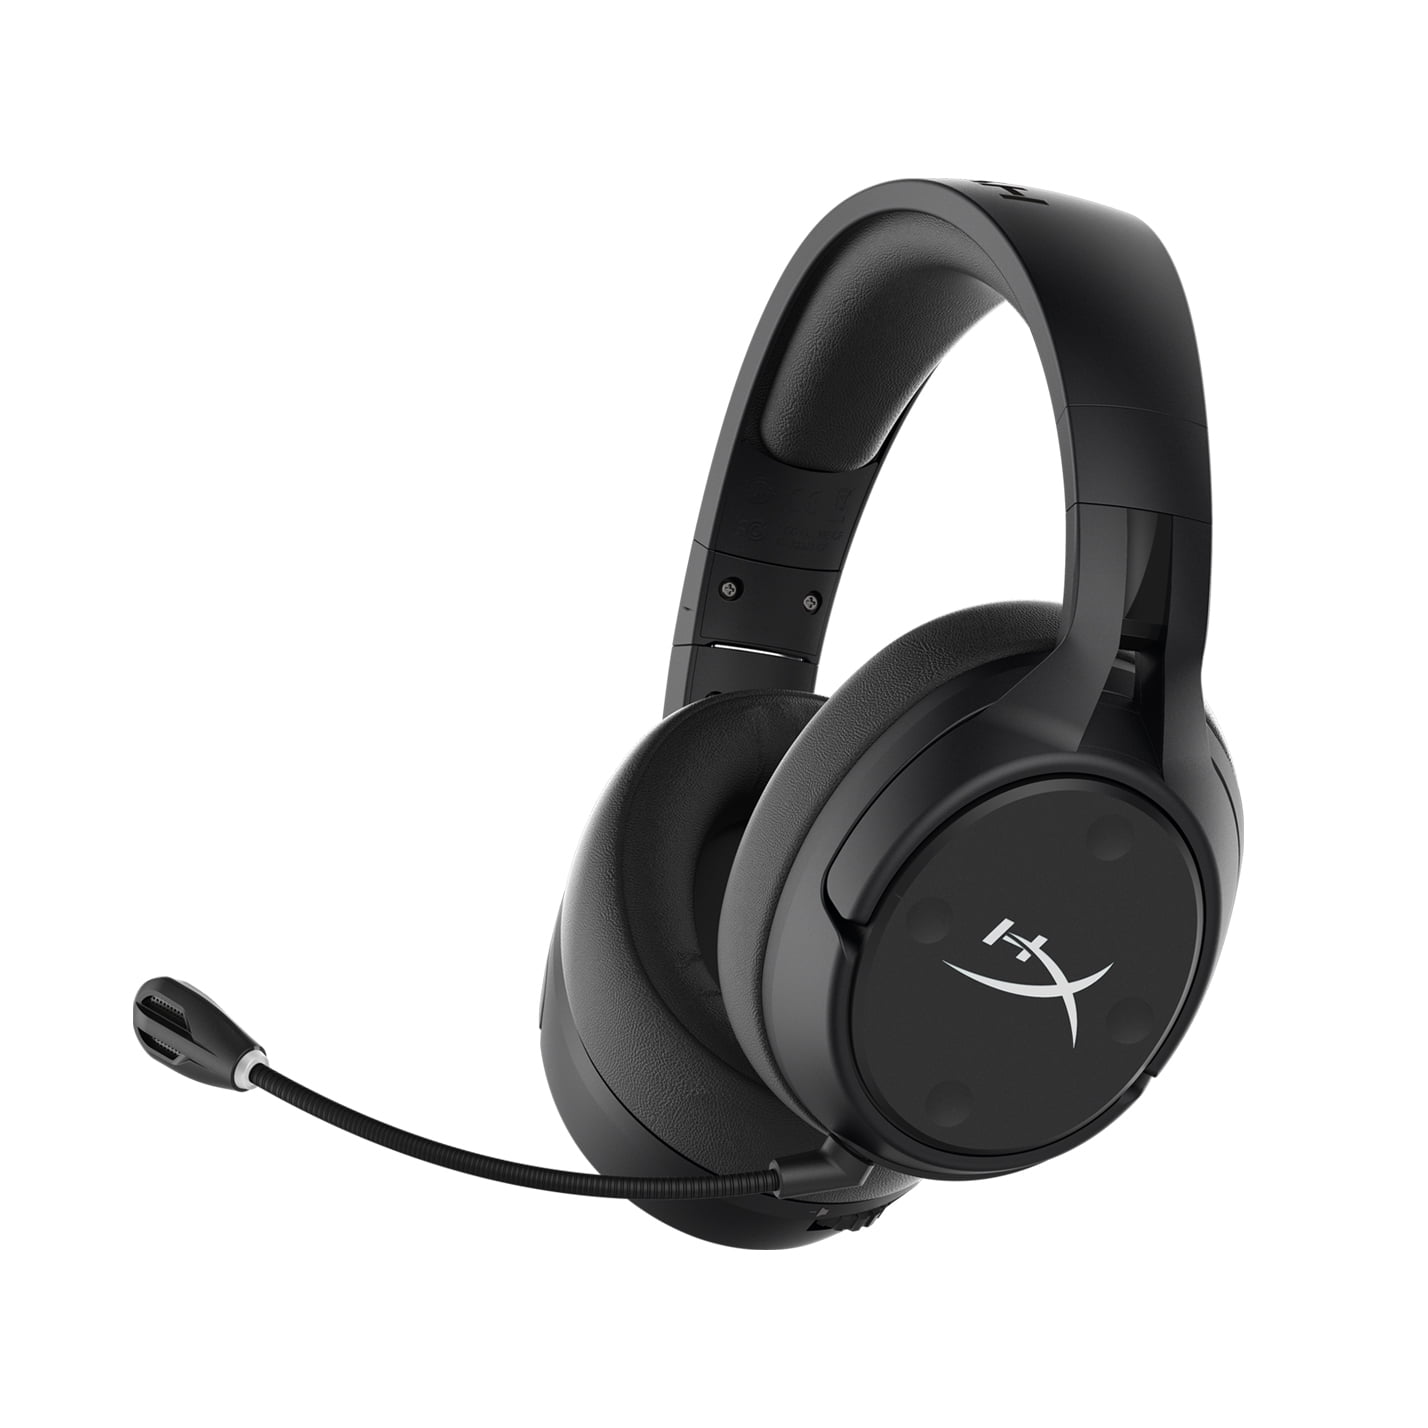 HyperX Cloud 3 Wireless review: all-day comfort with phenomenal battery life